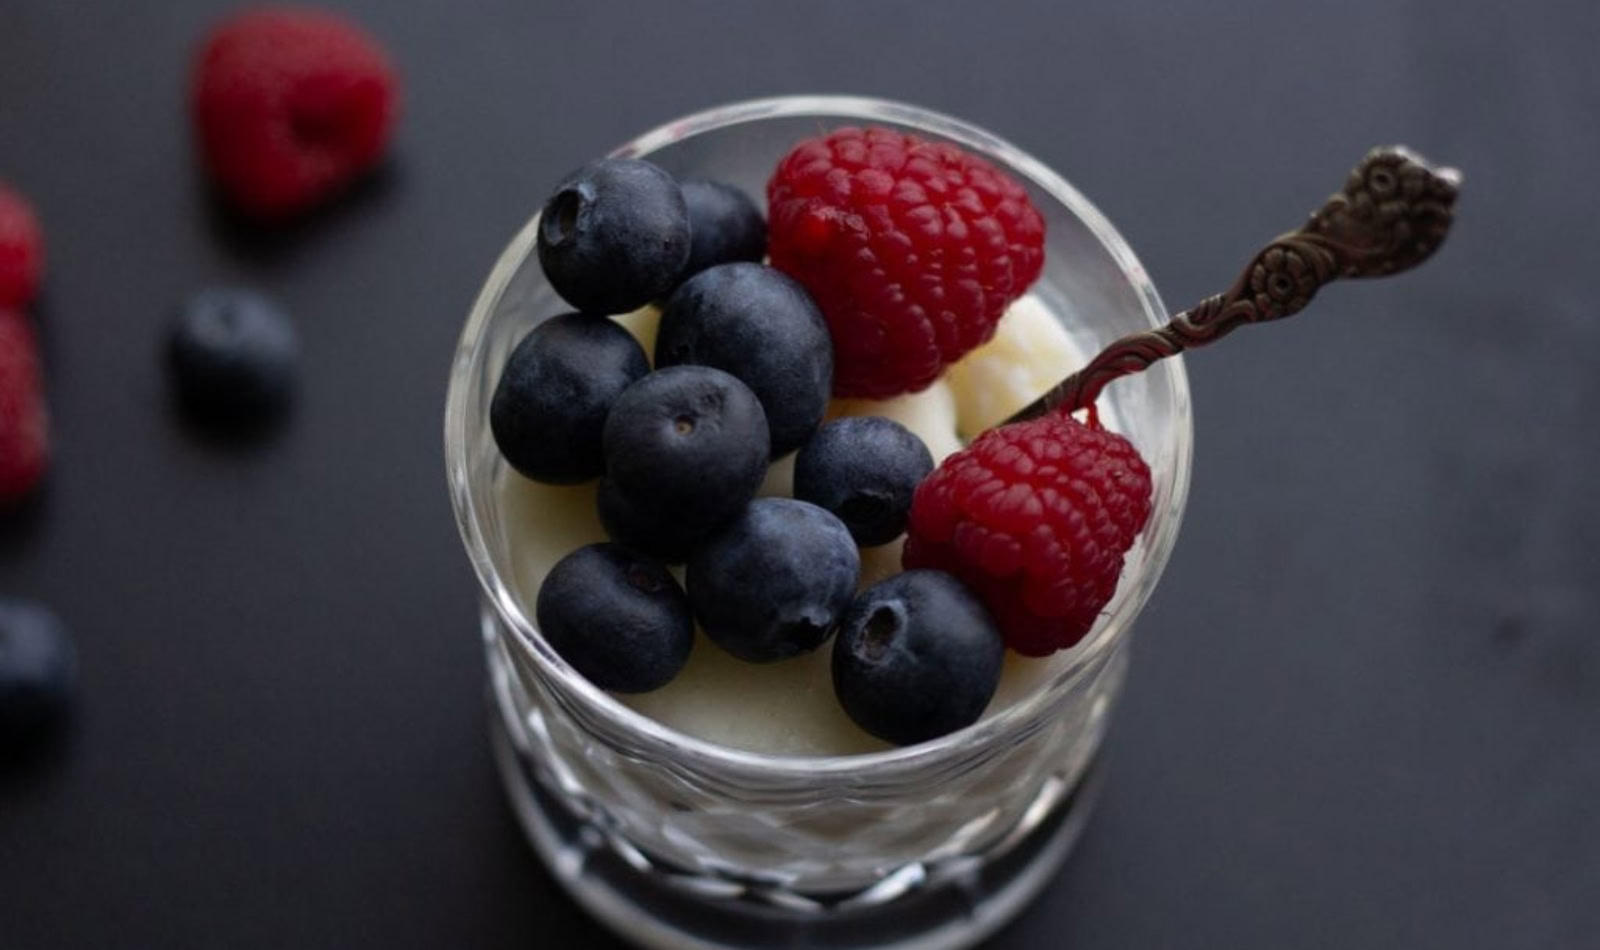 a glass of milk pudding with berries